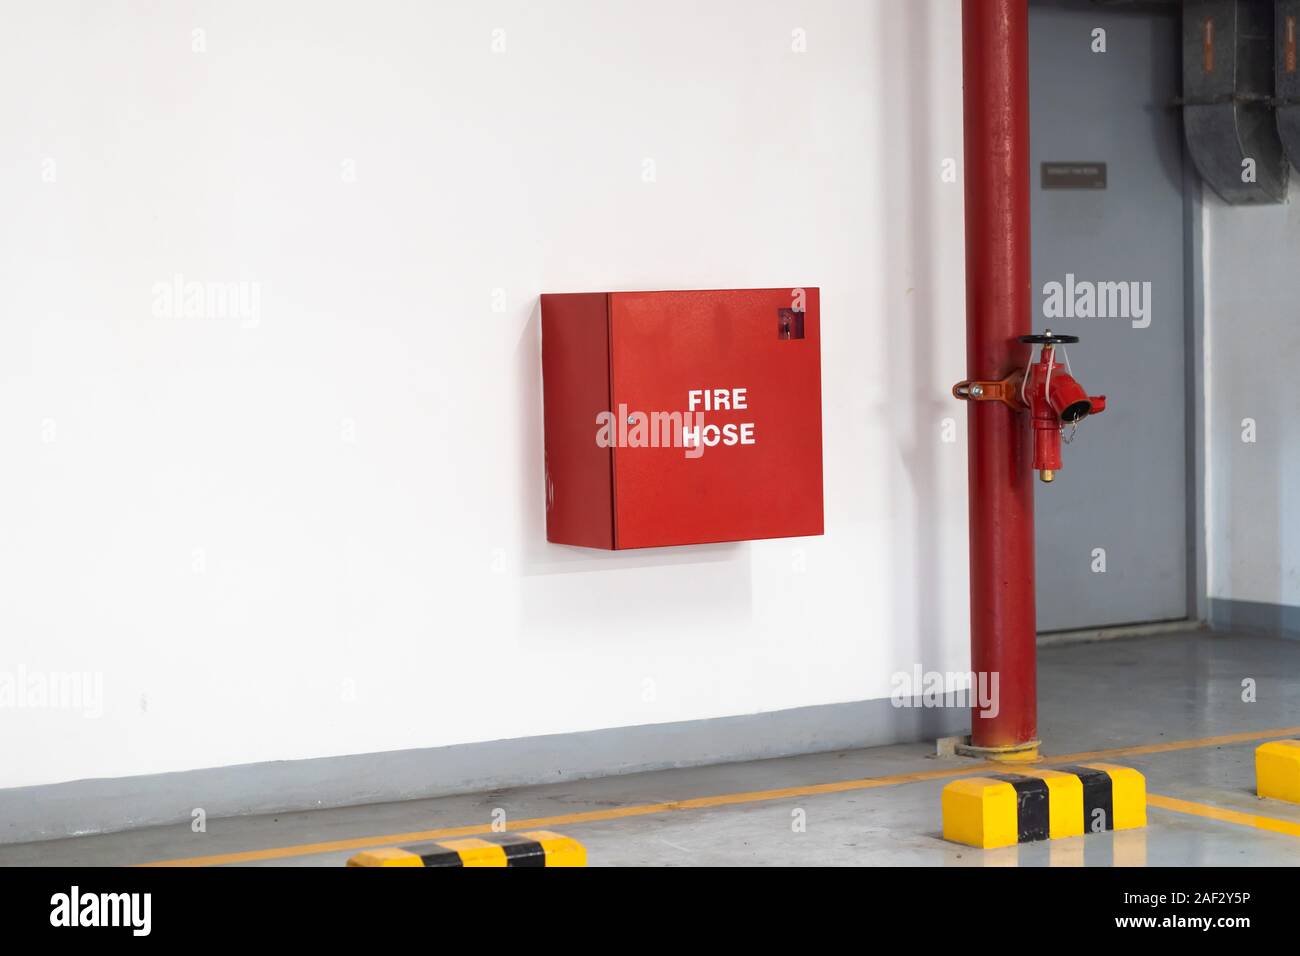 Fire hoses packed inside of red emergency box at the wall Stock Photo